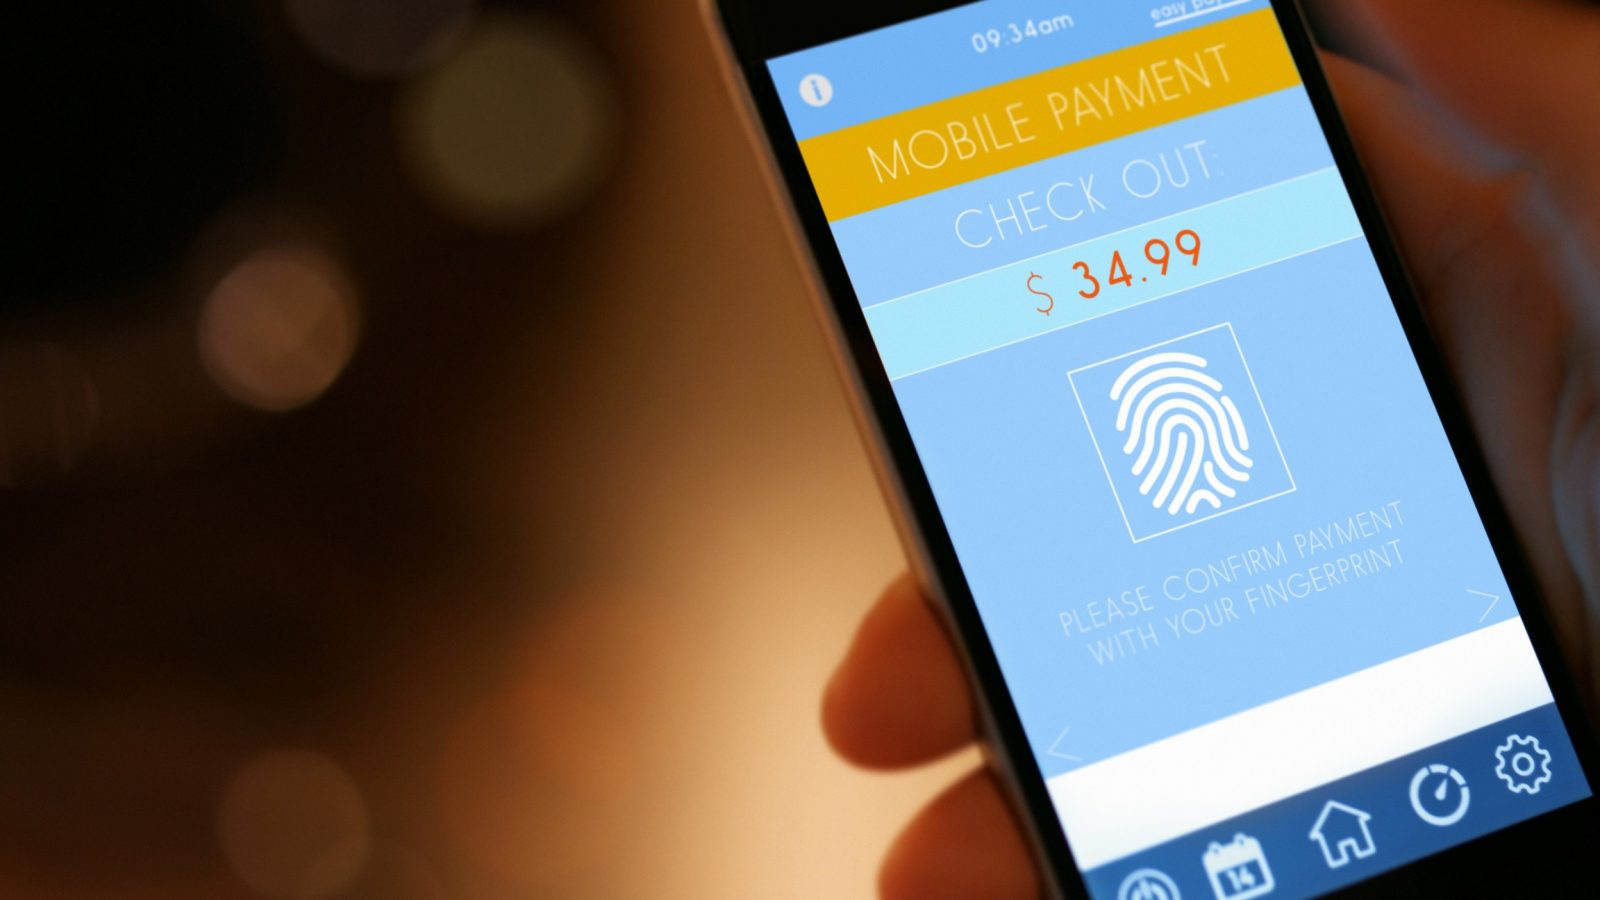 Mobile Payments in Orange County